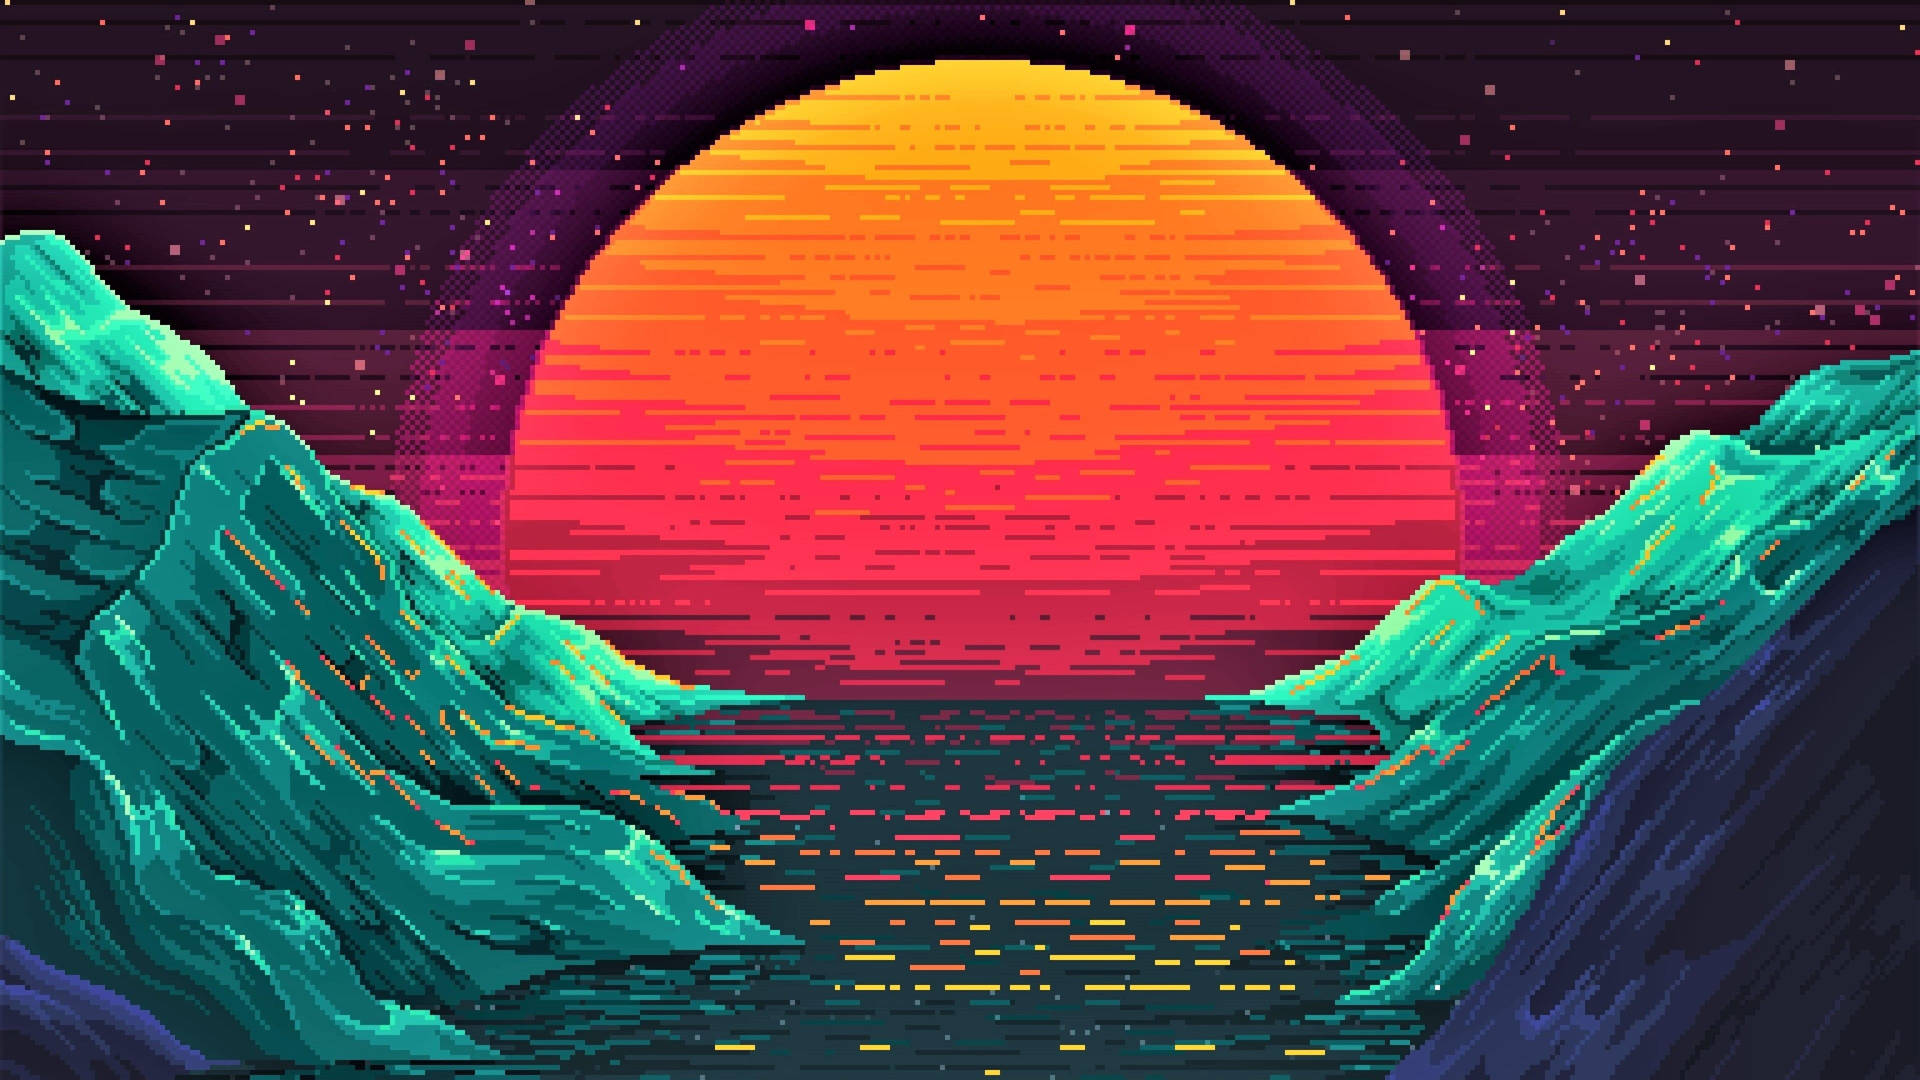 Enjoying the breathtaking view of a pixelized sunset Wallpaper